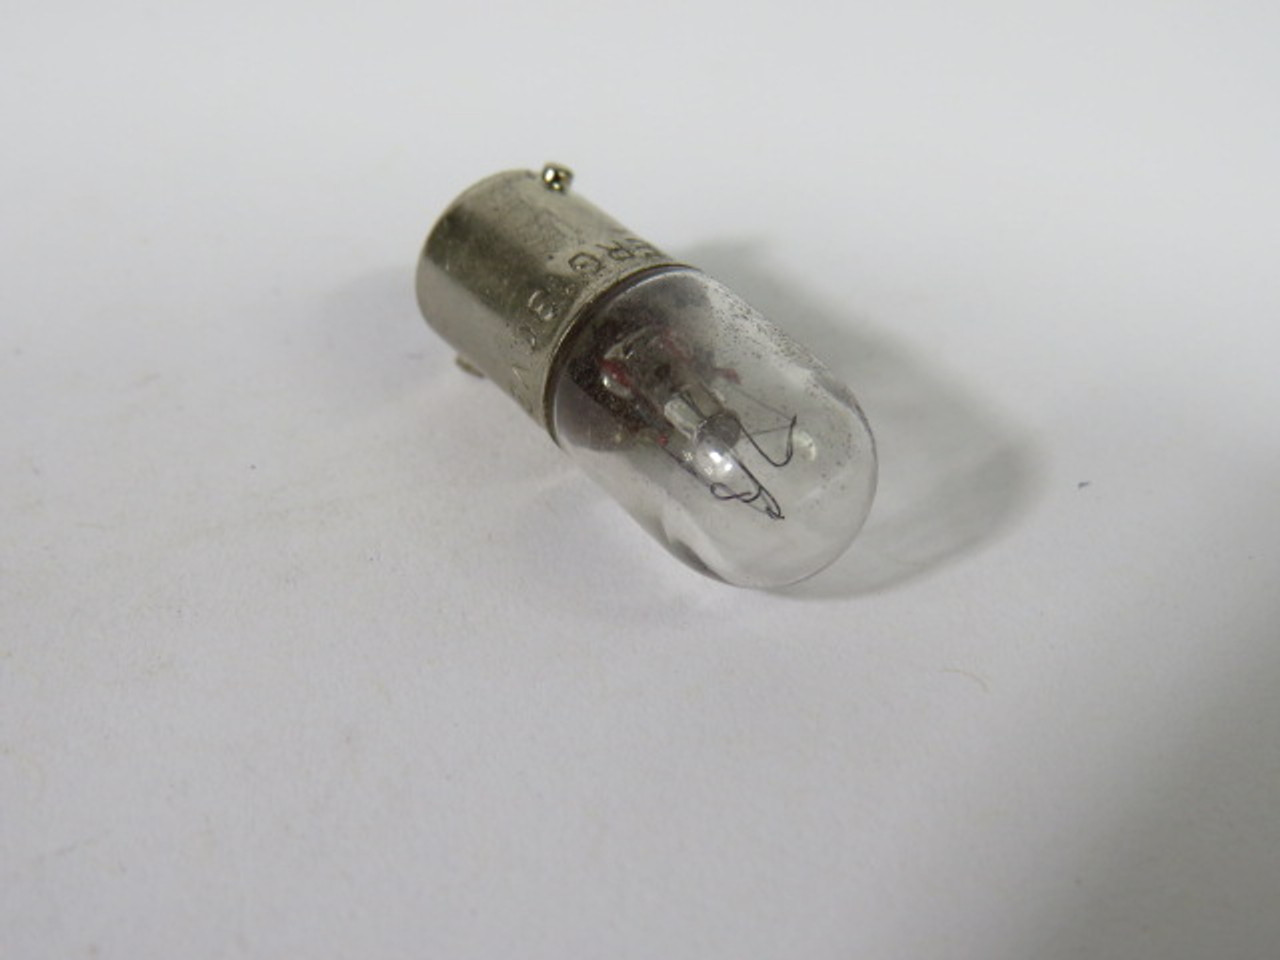 Siemens 3SX1-731 Incandescent Lamp 130V USED